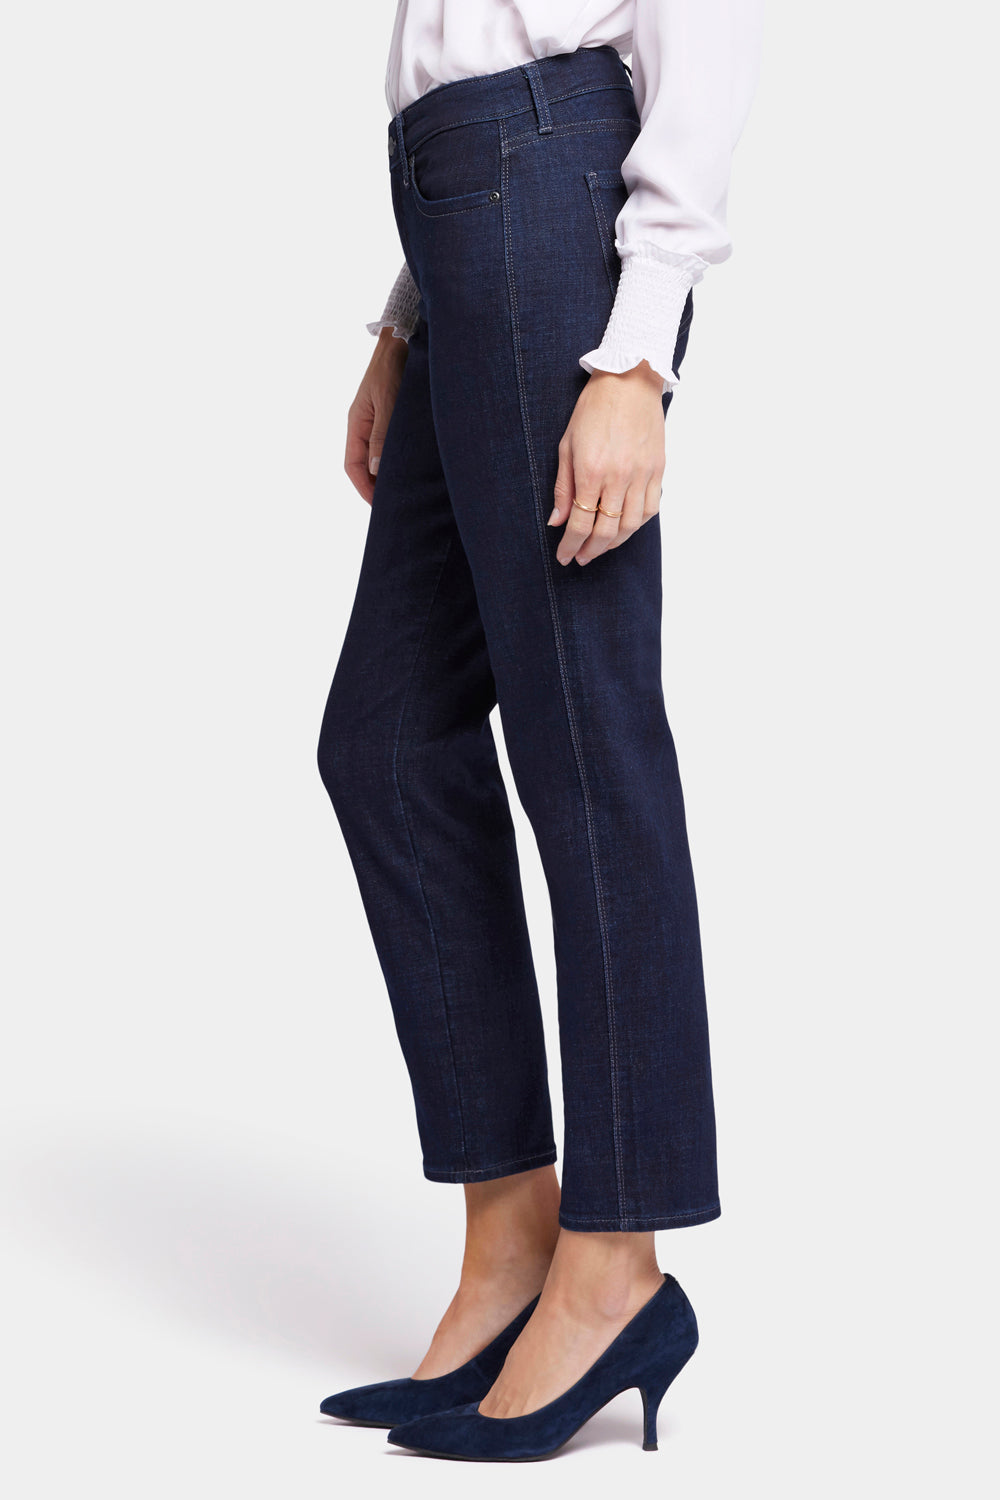 NYDJ Stella Tapered Ankle Jeans  - Rinse